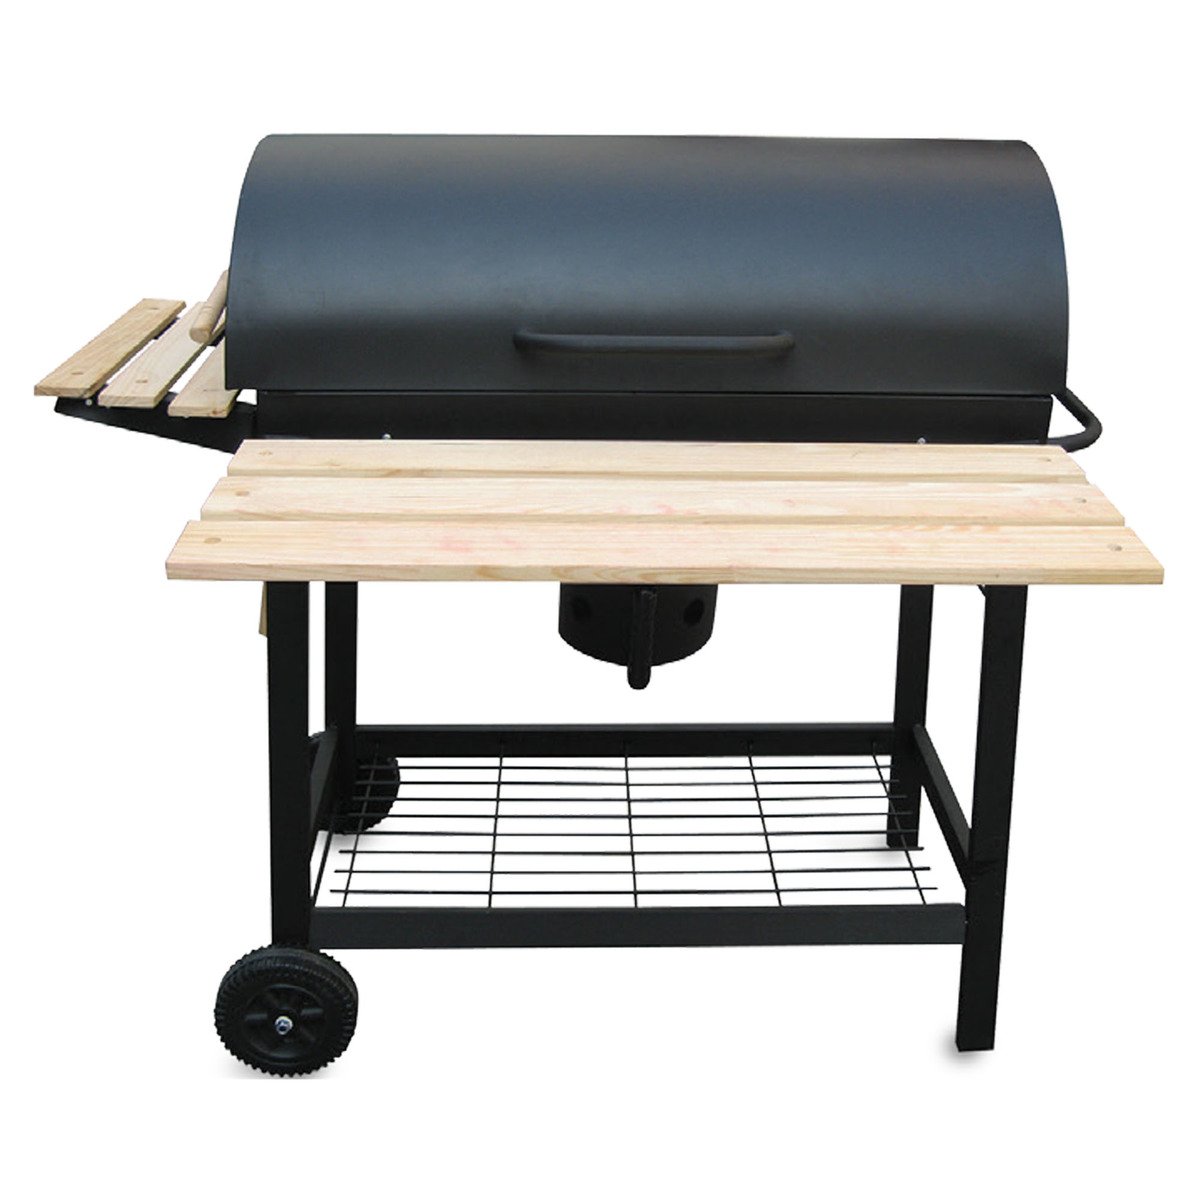 Relax BBQ Grill 3038A